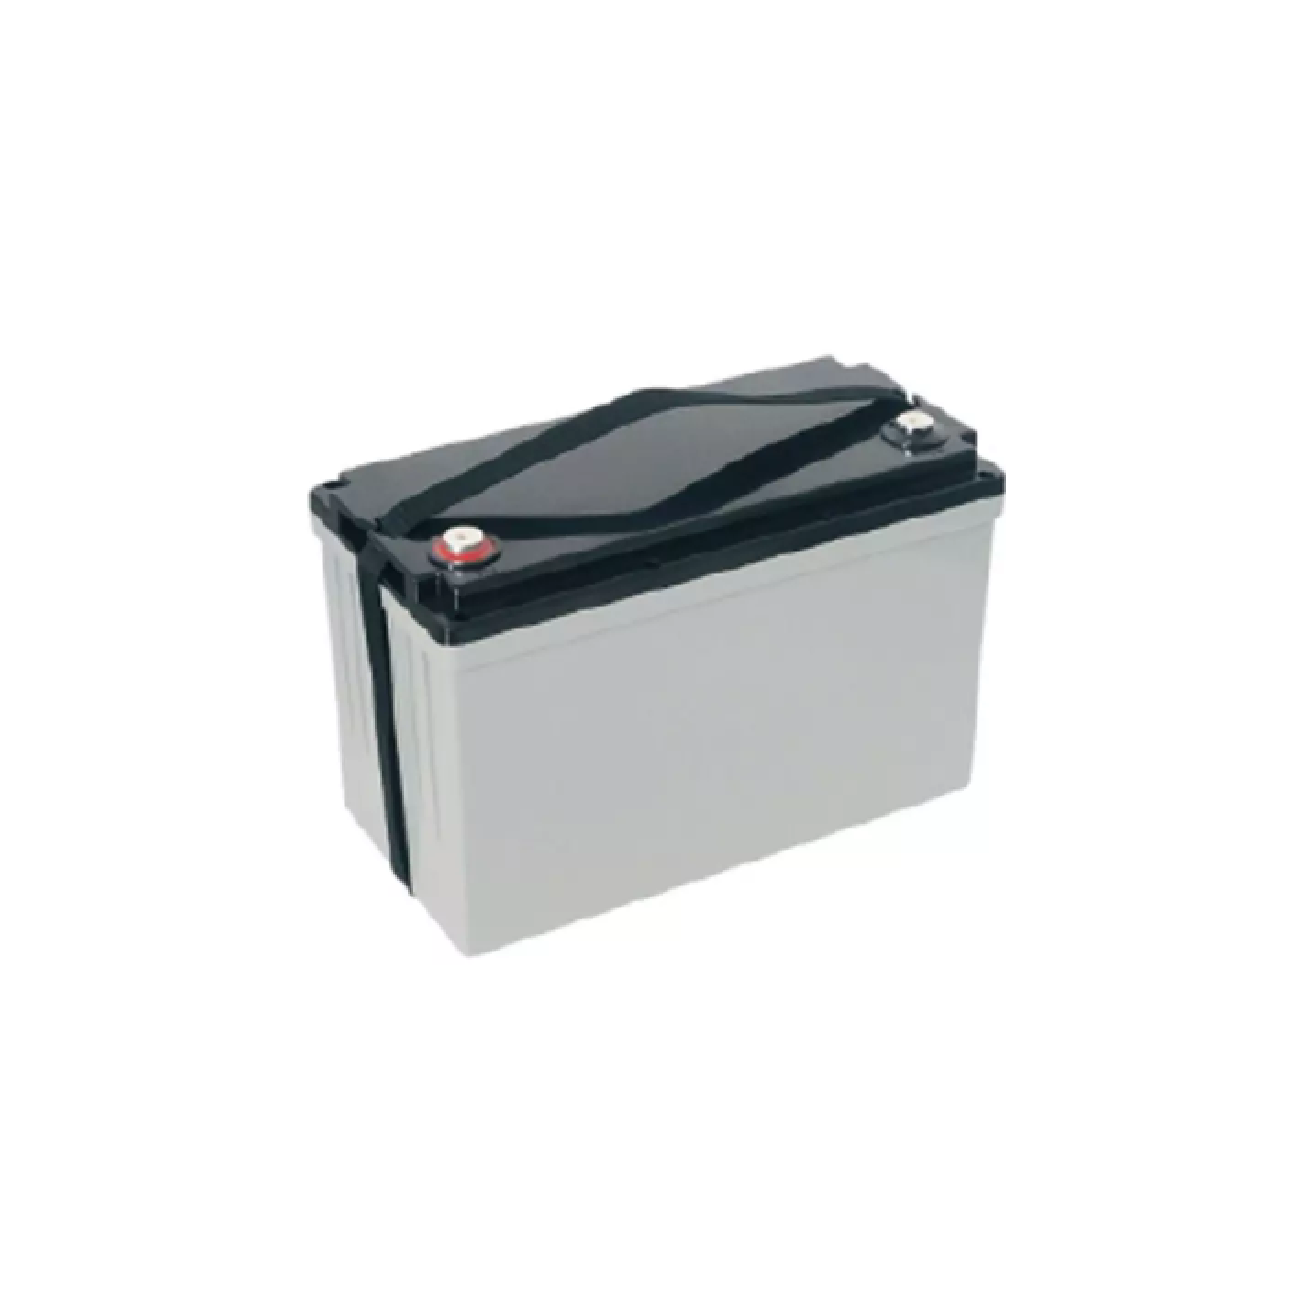 Introduction of LiFePO4 batteries/pack